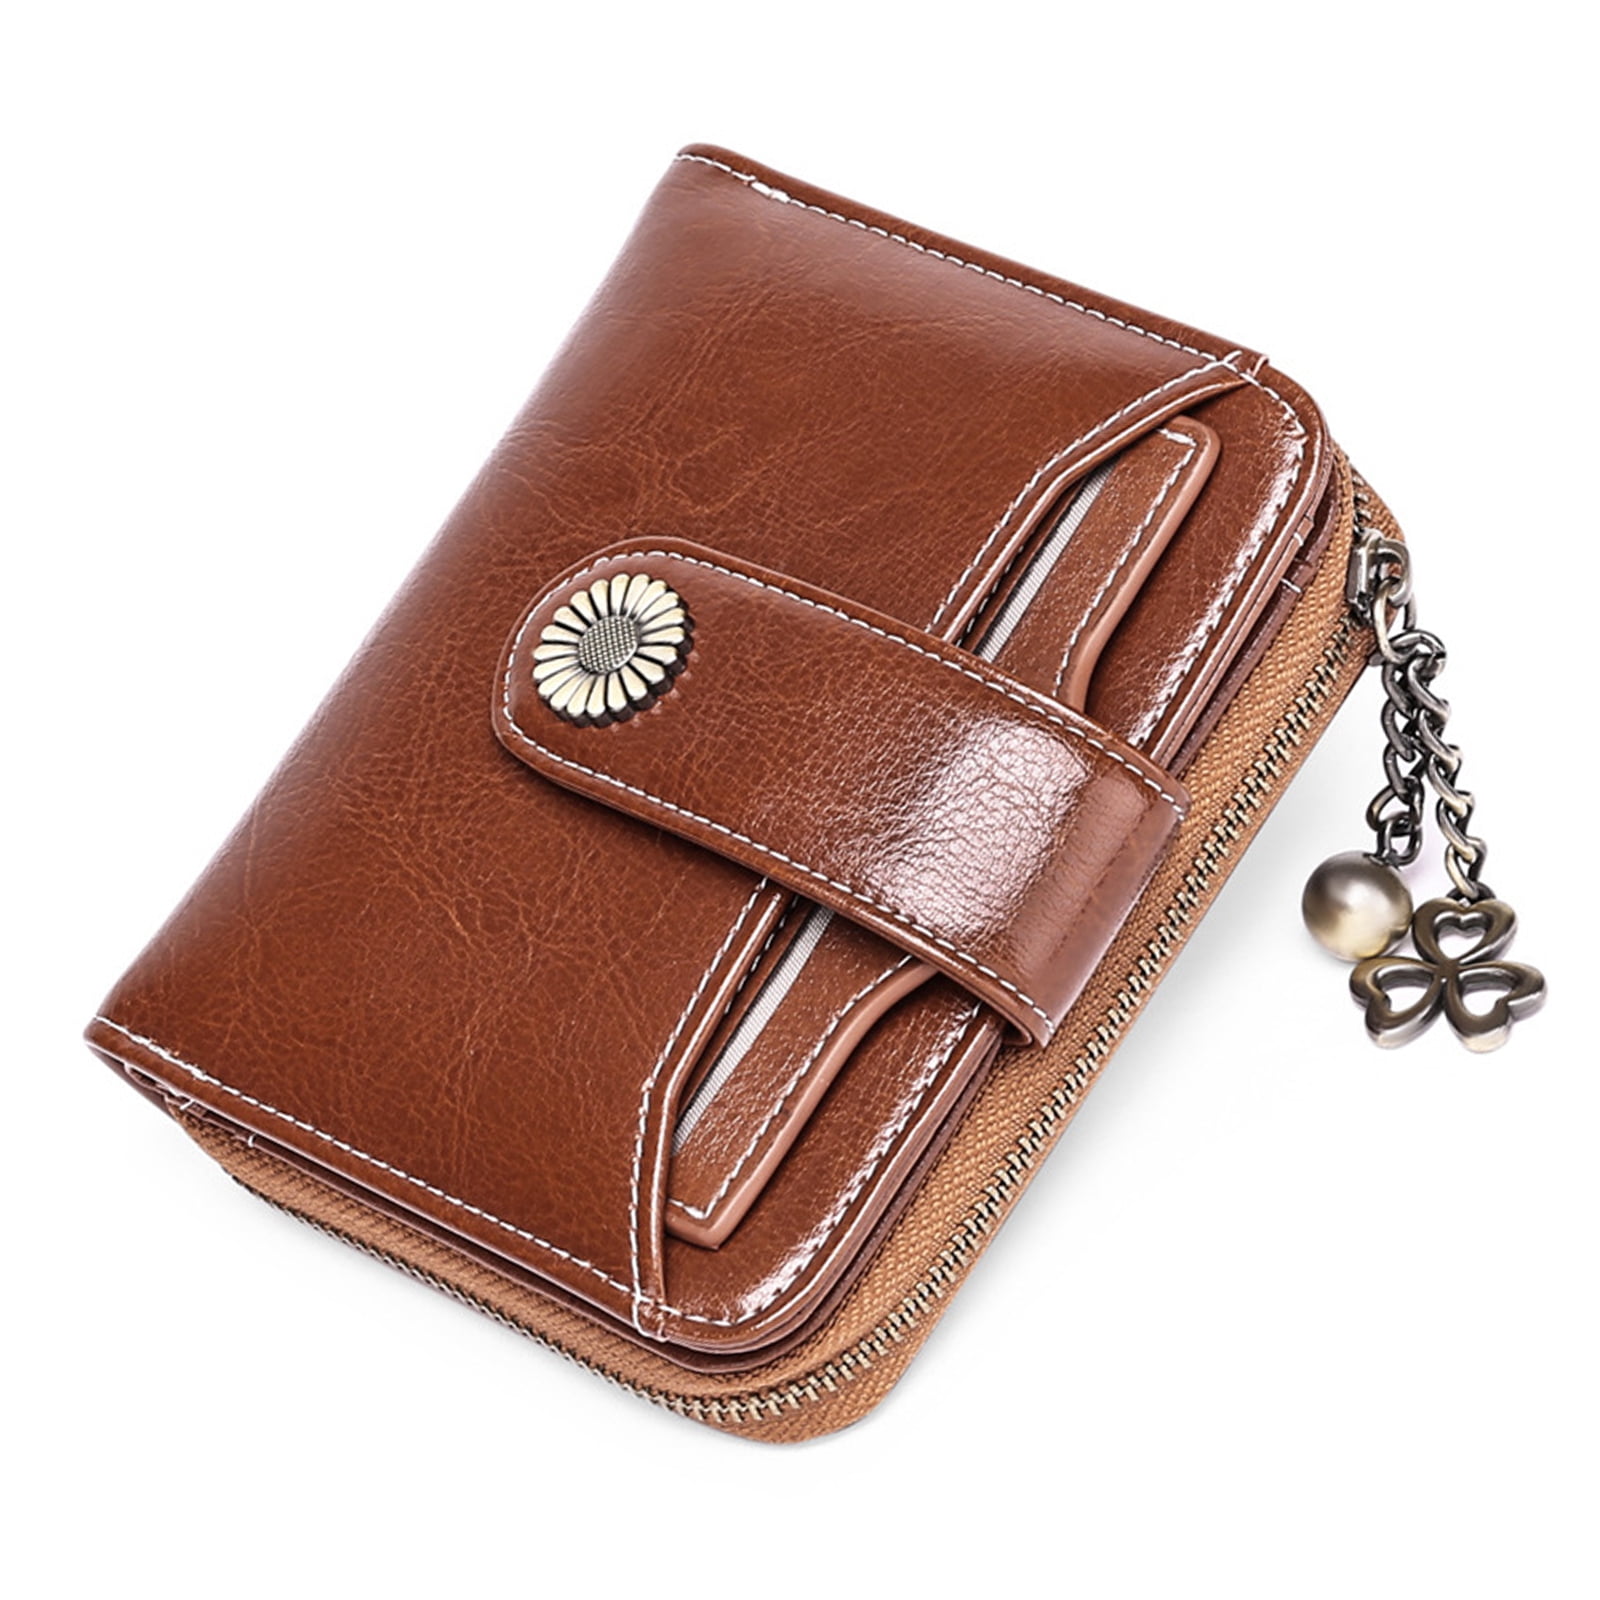 flintronic Leather Mini Front Pocket Wallet with Zipper,RFID Blocking 